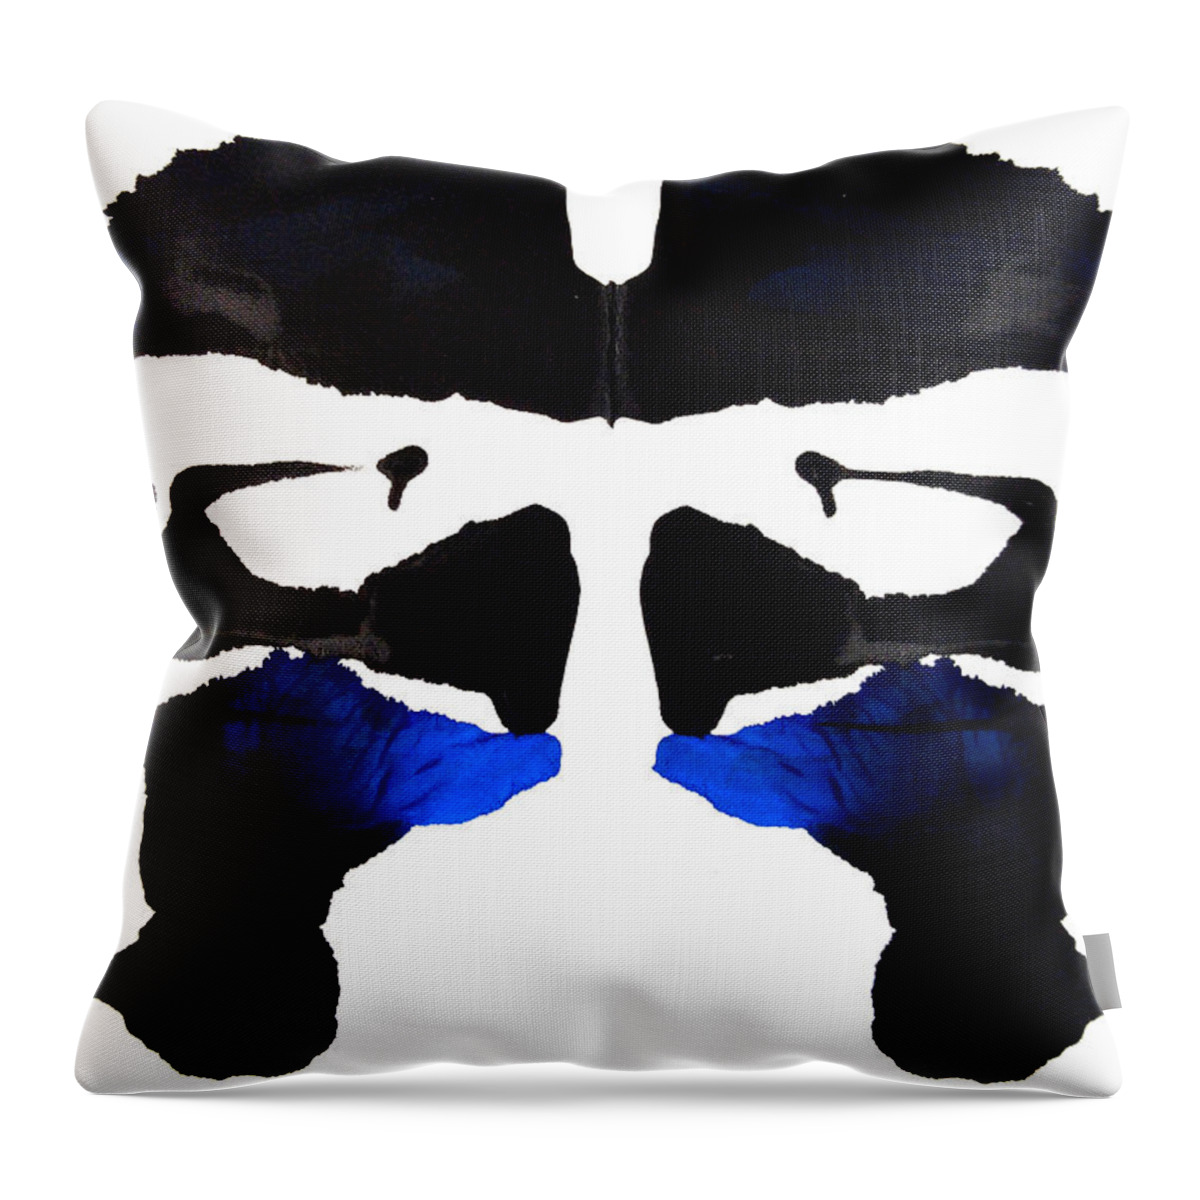 Statement Throw Pillow featuring the painting Storm Trooper by Stephenie Zagorski